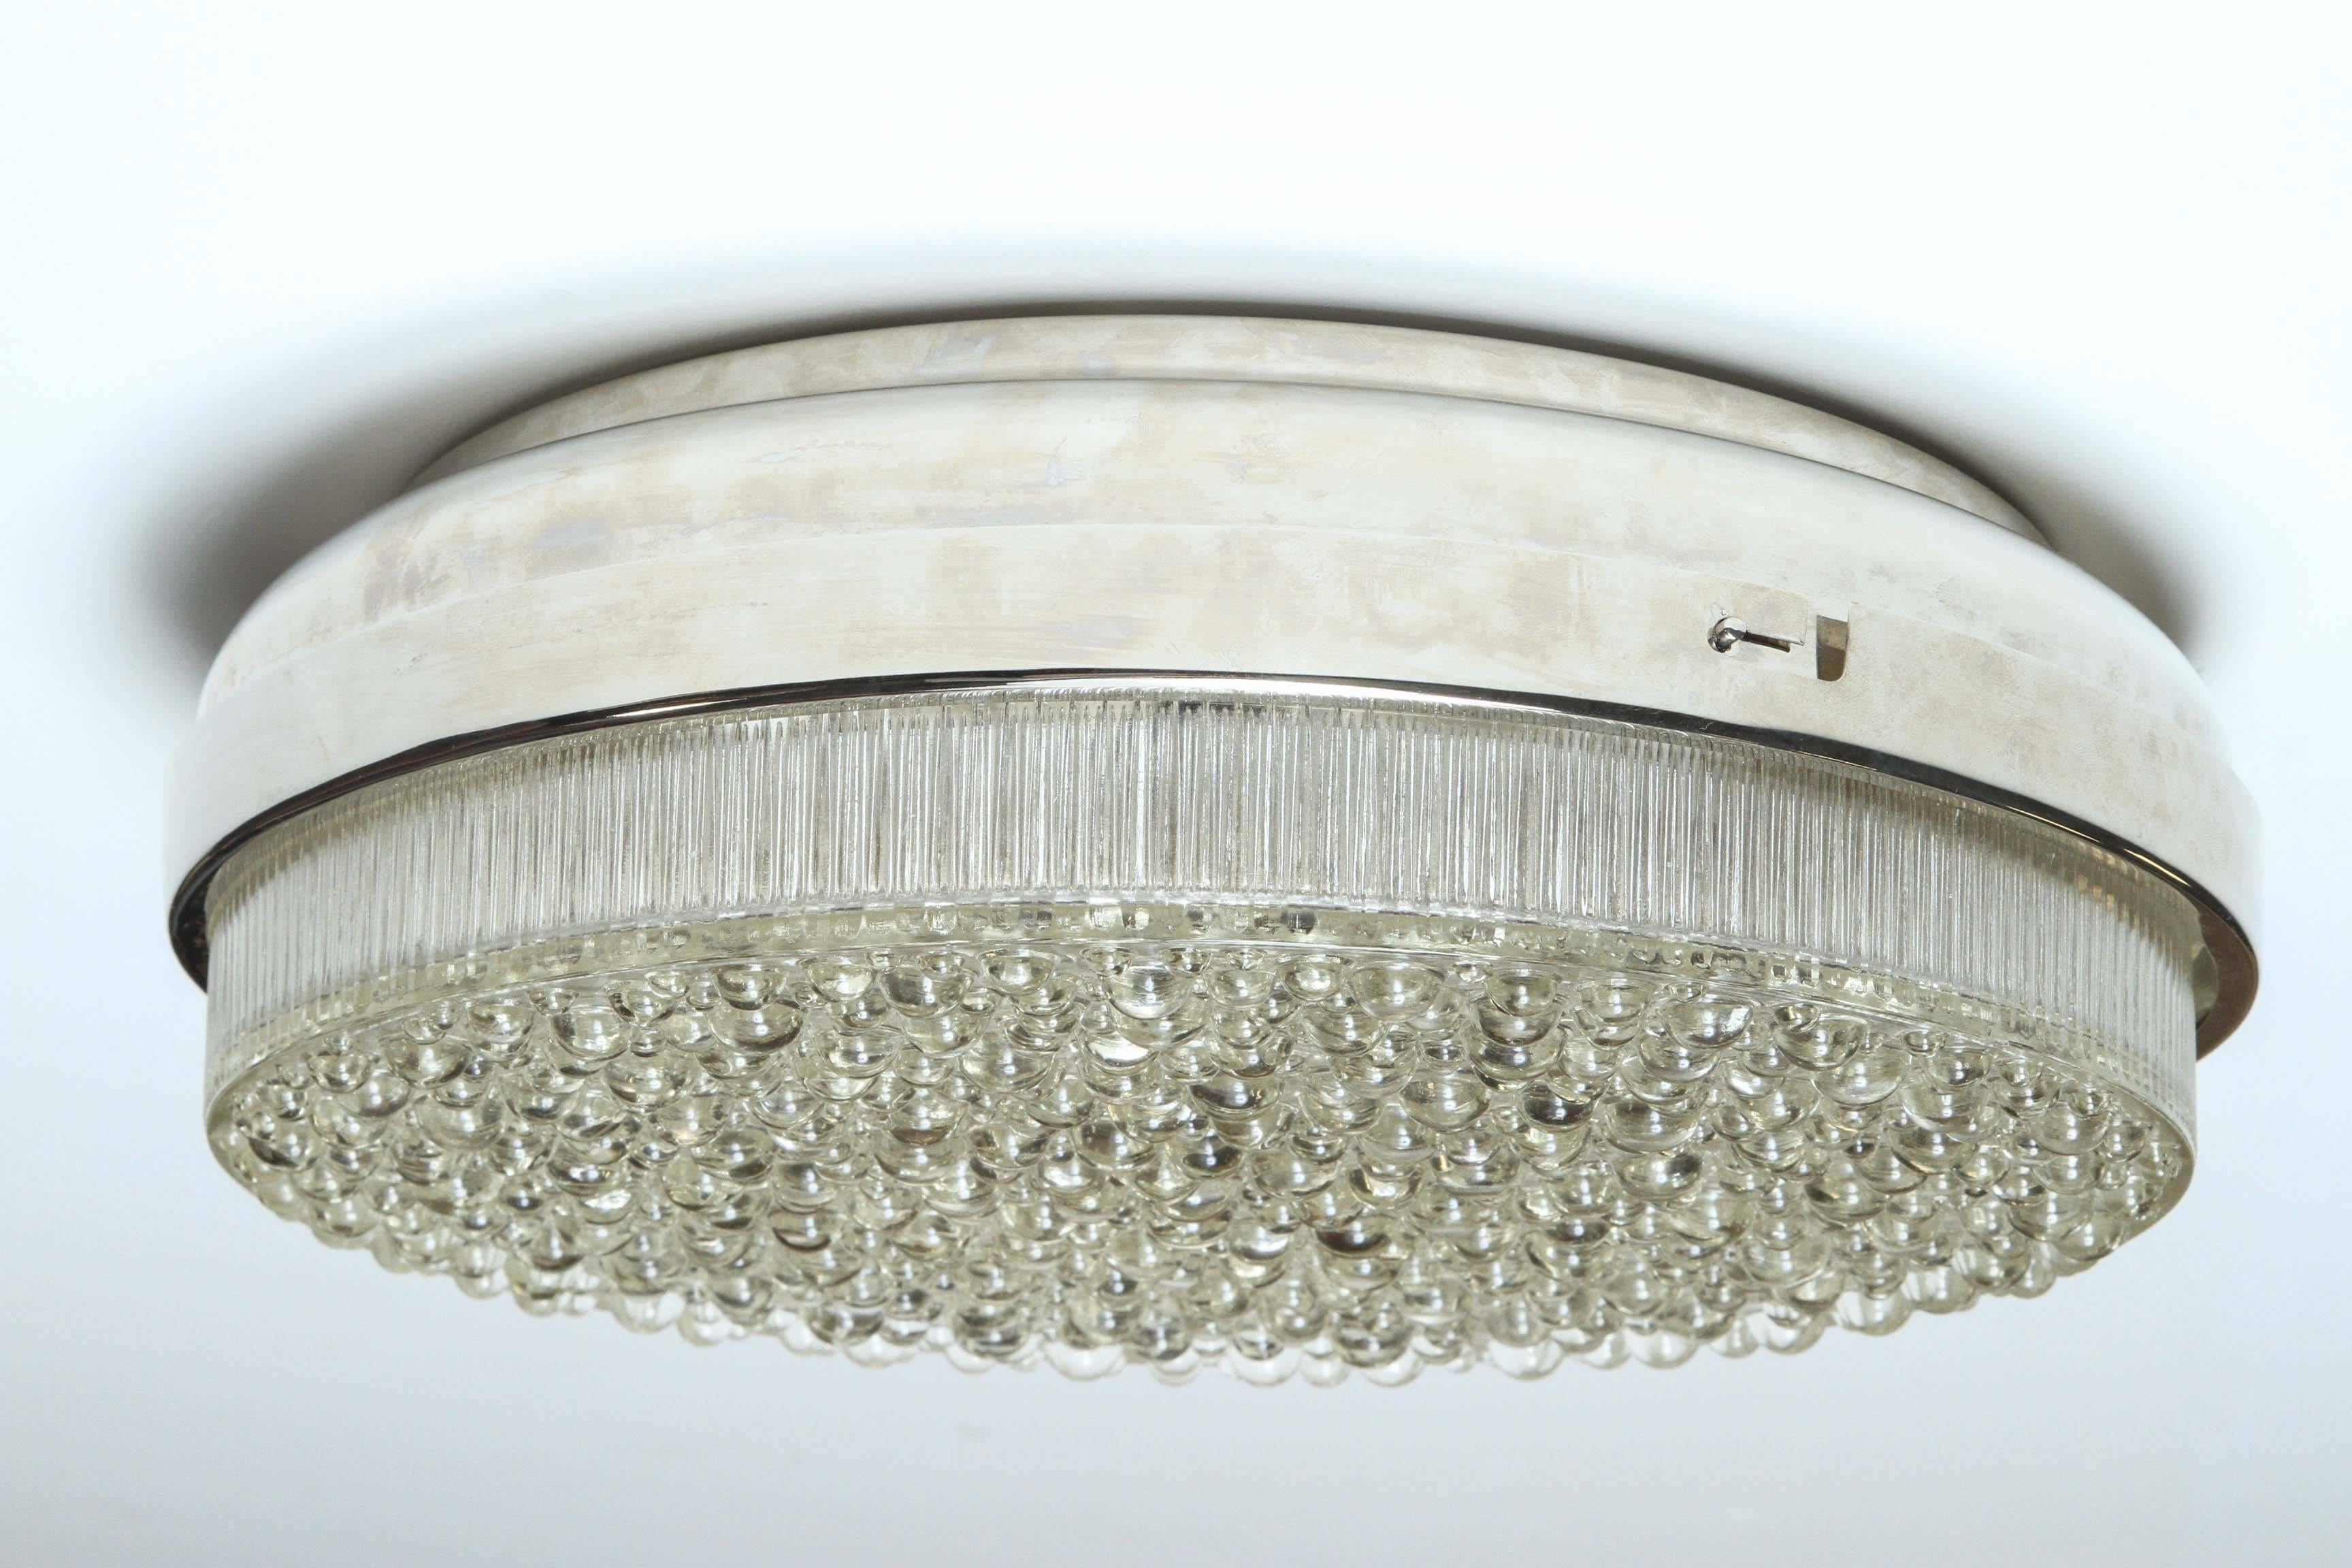 1960s German bubble glass ceiling fixture/sconce.
The textured bubble glass is supported by a polished chrome frame and has two newly rewired light sources.